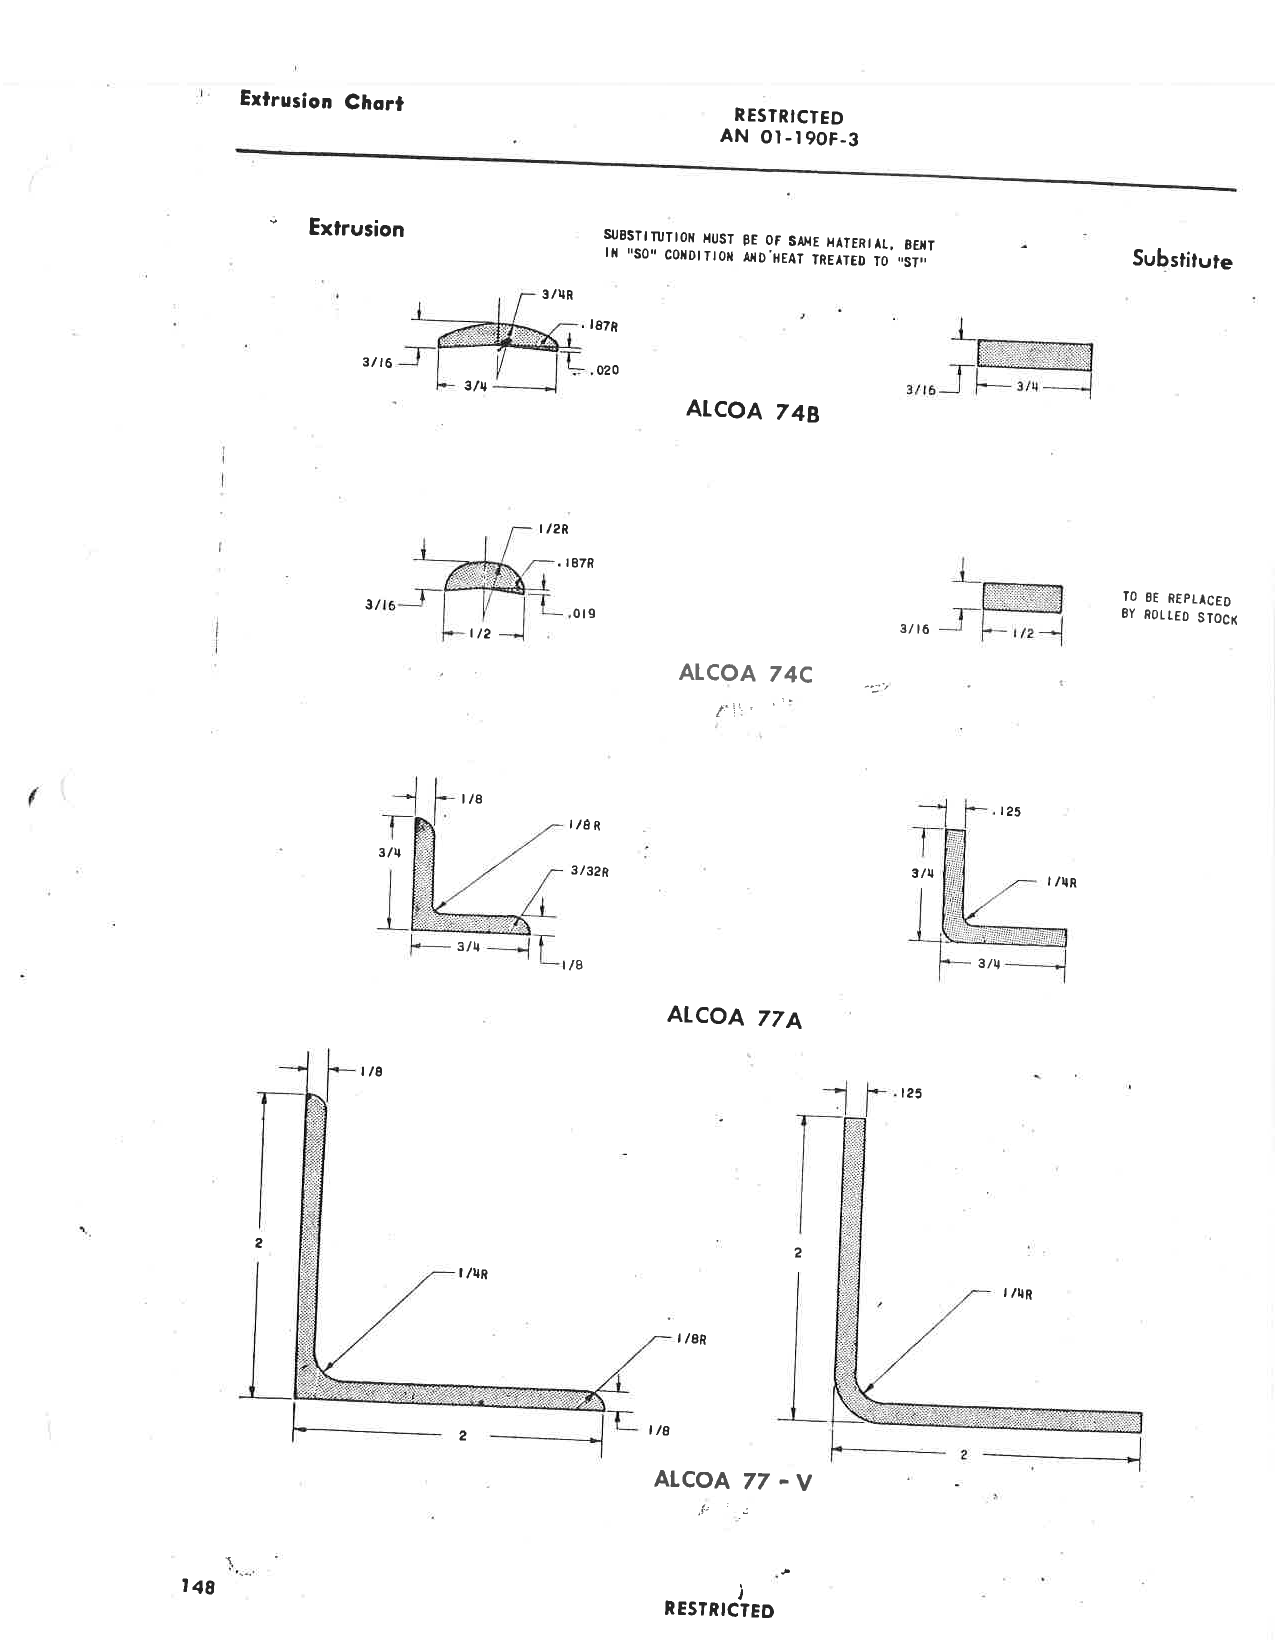 Sample page 143 from AirCorps Library document: Structural Repair - Handbook of Instructions - Wildcat FM-1 & FM-2